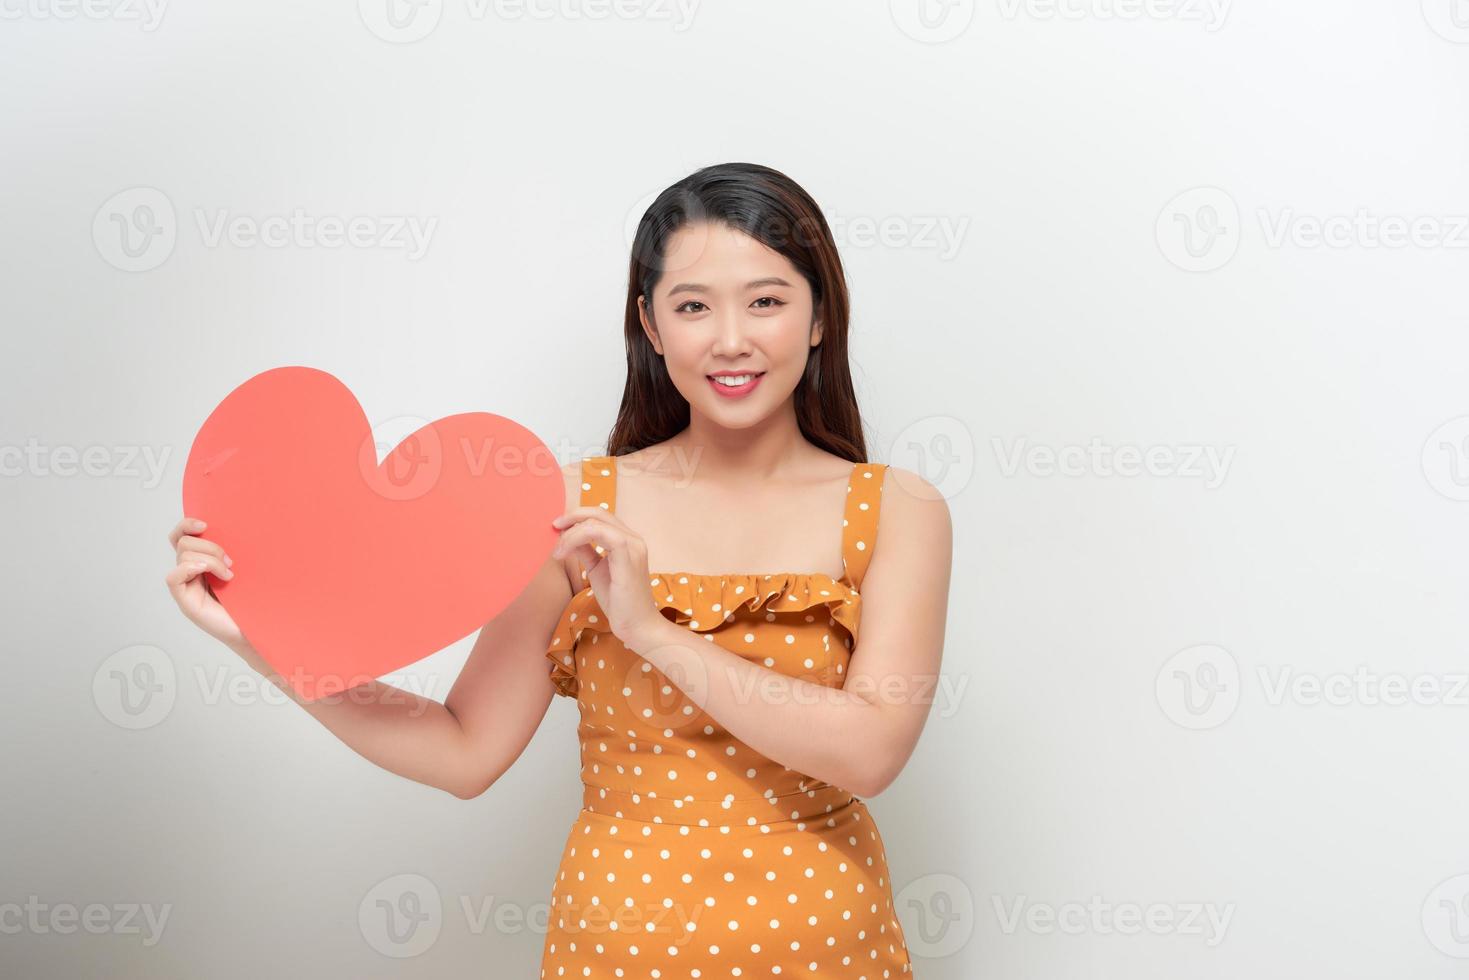 Love and valentines day. Sexy woman in polka dot dress holding heart smiling cute and adorable photo